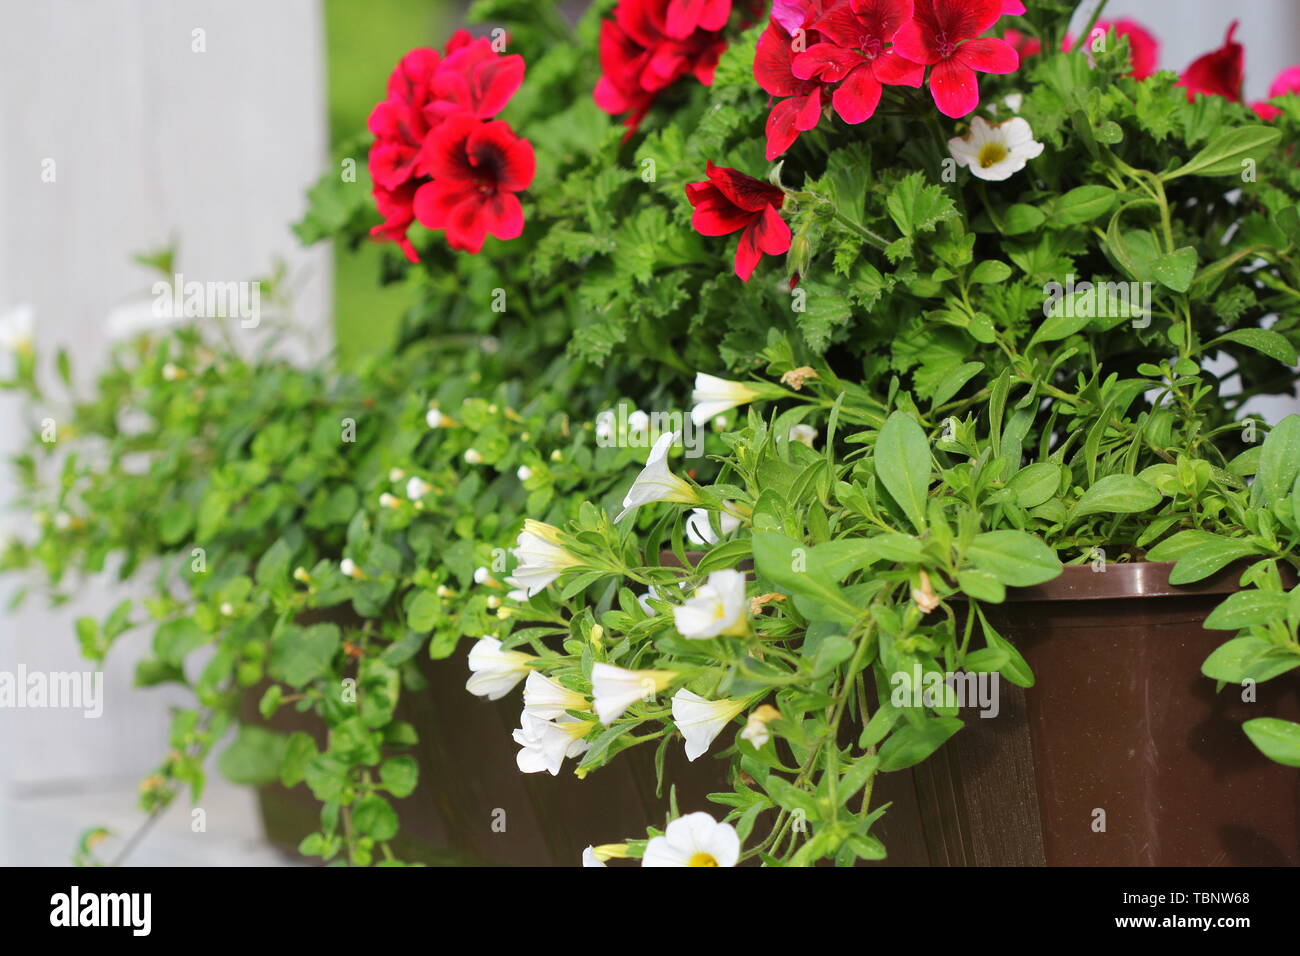 Red and white flowering plants in a flower box in the window sill . Geranium, petunia and bacopa flower growth in pot Stock Photo